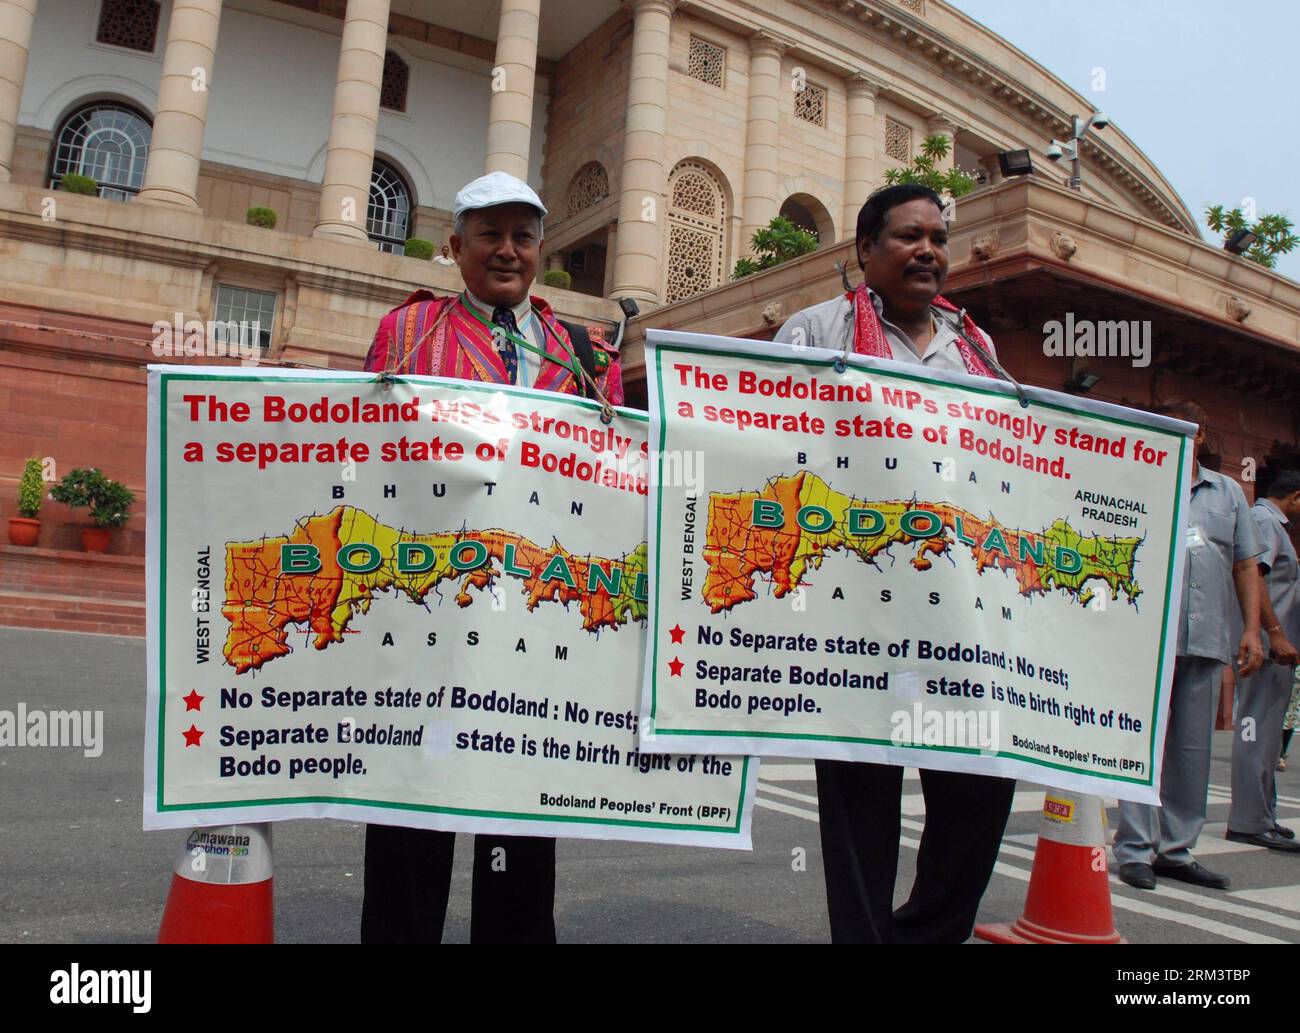 Bildnummer: 60321784  Datum: 05.08.2013  Copyright: imago/Xinhua (130805) -- NEW DELHI, Aug. 5, 2013 (Xinhua) -- Members of Parliament from Bodoland hold banners demanding a separate state in New Delhi, India, Aug. 5, 2013. Indian Parliament saw disruptions on the first of its monsoon session which opened Monday over the setting up of a new state, which has caused widespread controversy in the country. (Xinhua/Partha Sarkar) INDIA-NEW DELHI-MEMBER OF PARLIAMENT PUBLICATIONxNOTxINxCHN Gesellschaft x2x xkg 2013 quer o0 Politik Demo Protest     60321784 Date 05 08 2013 Copyright Imago XINHUA  New Stock Photo